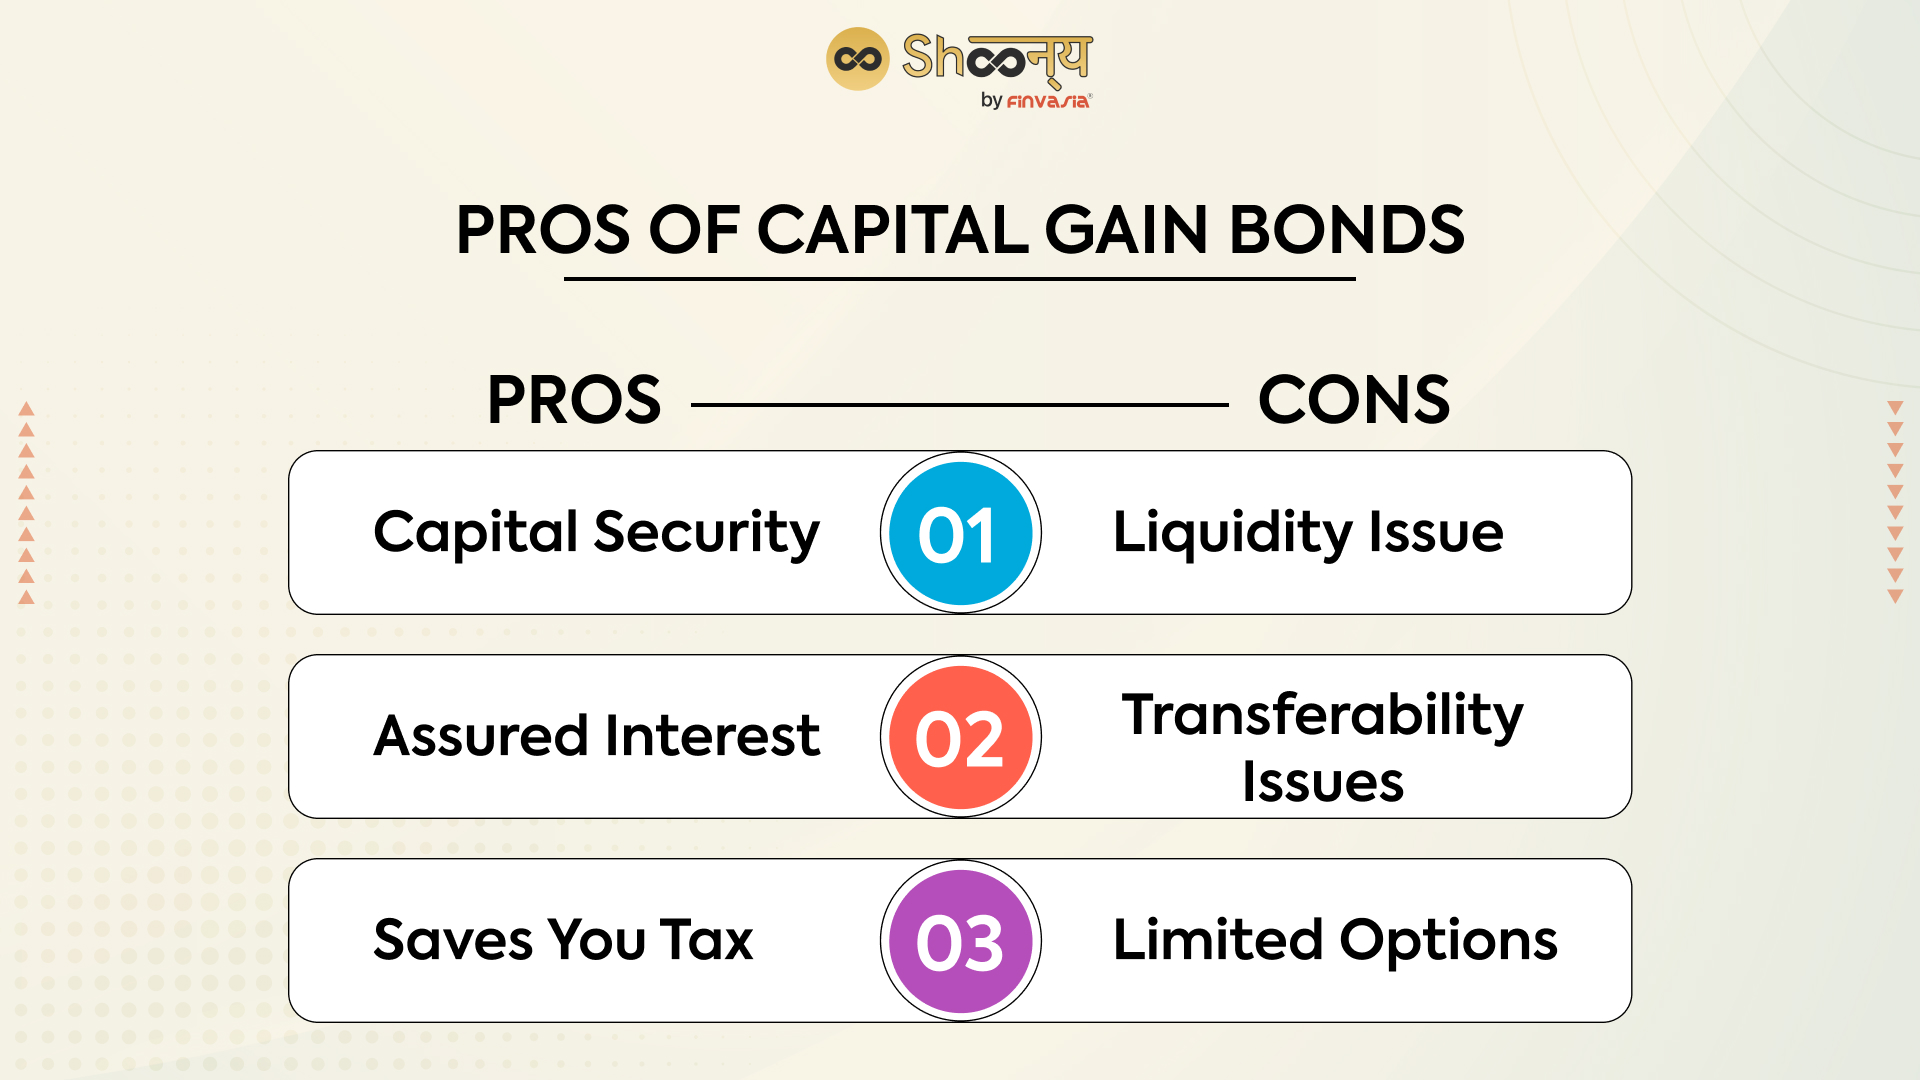 Pros and cons of capital gain bonds